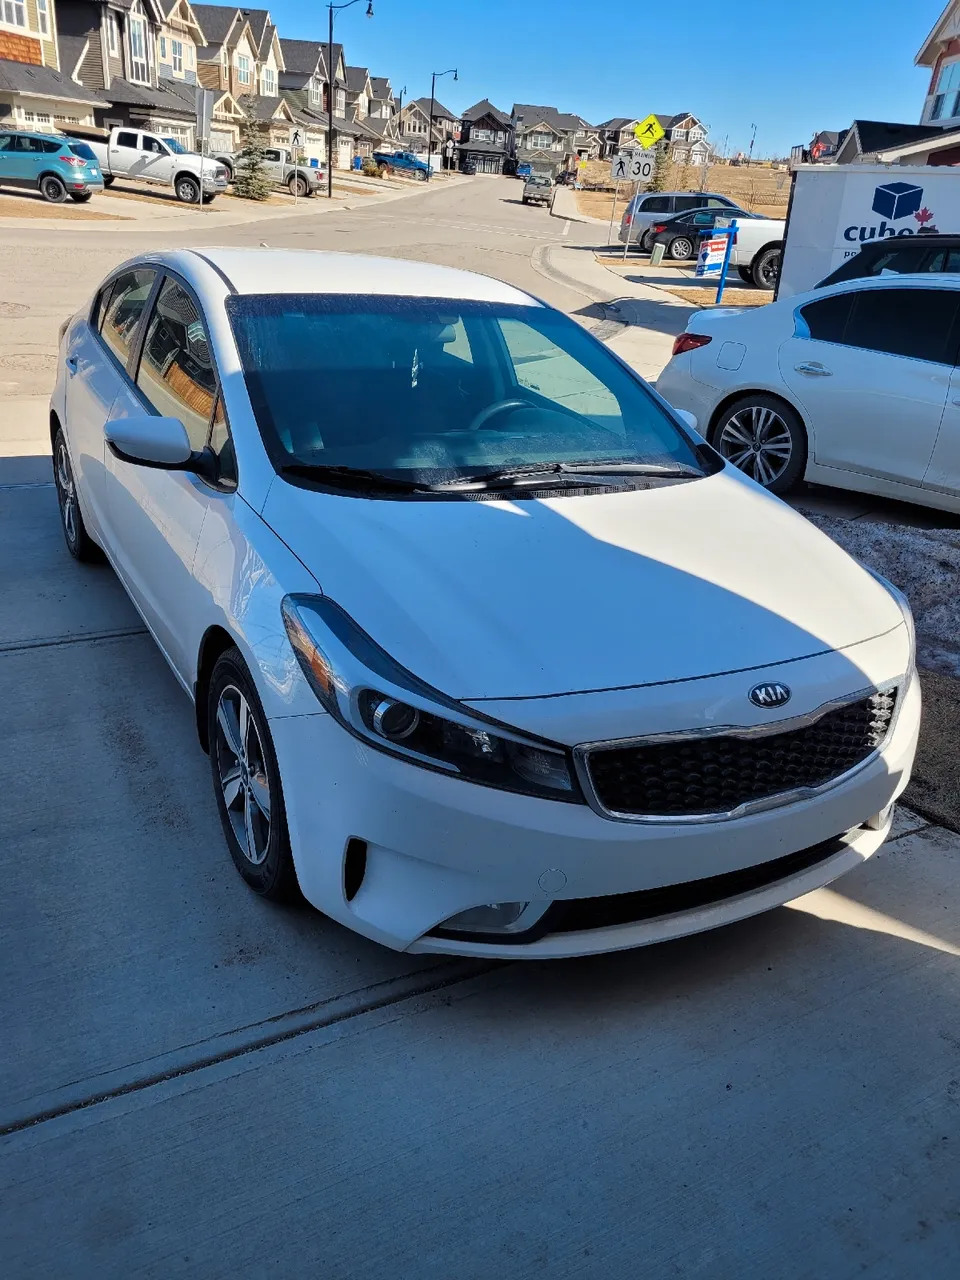 2018 Kia Forte - Priced to Sell! Great, reliable car